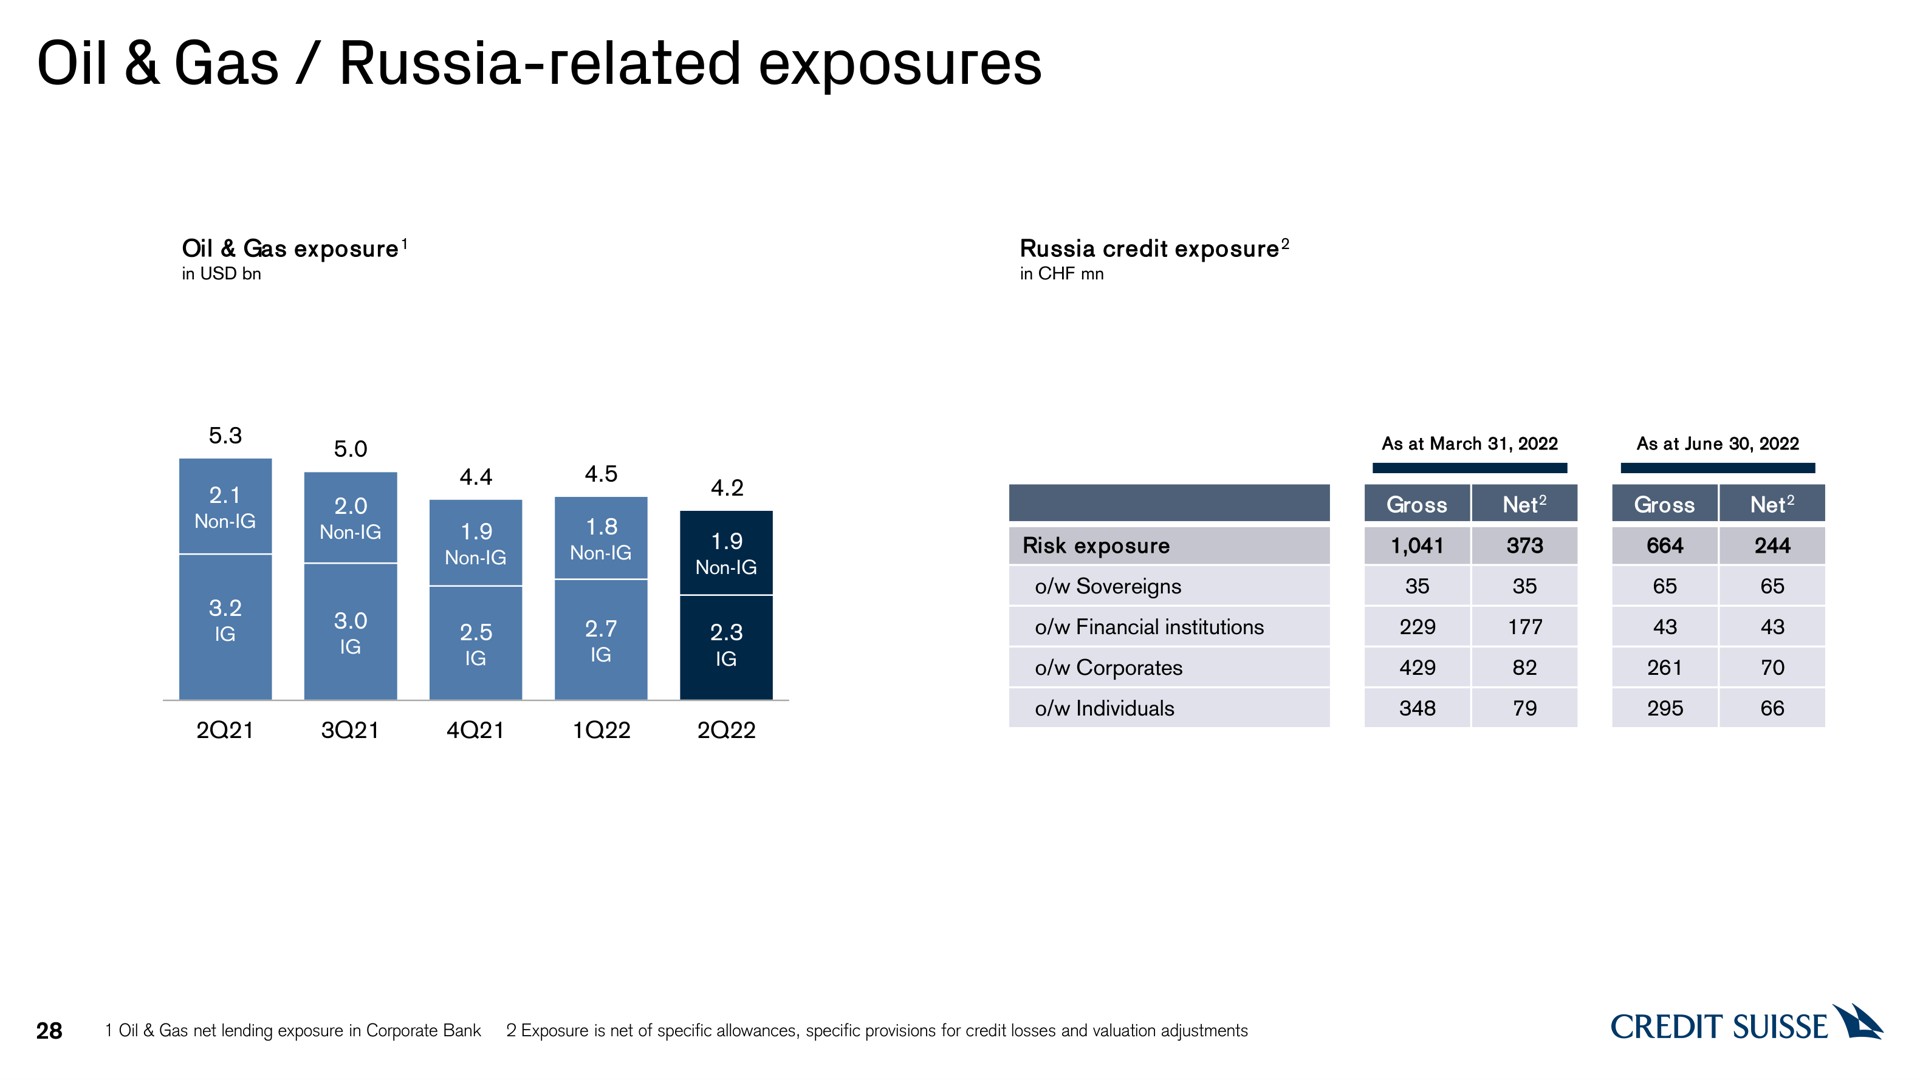 oil gas russia related exposures credit | Credit Suisse